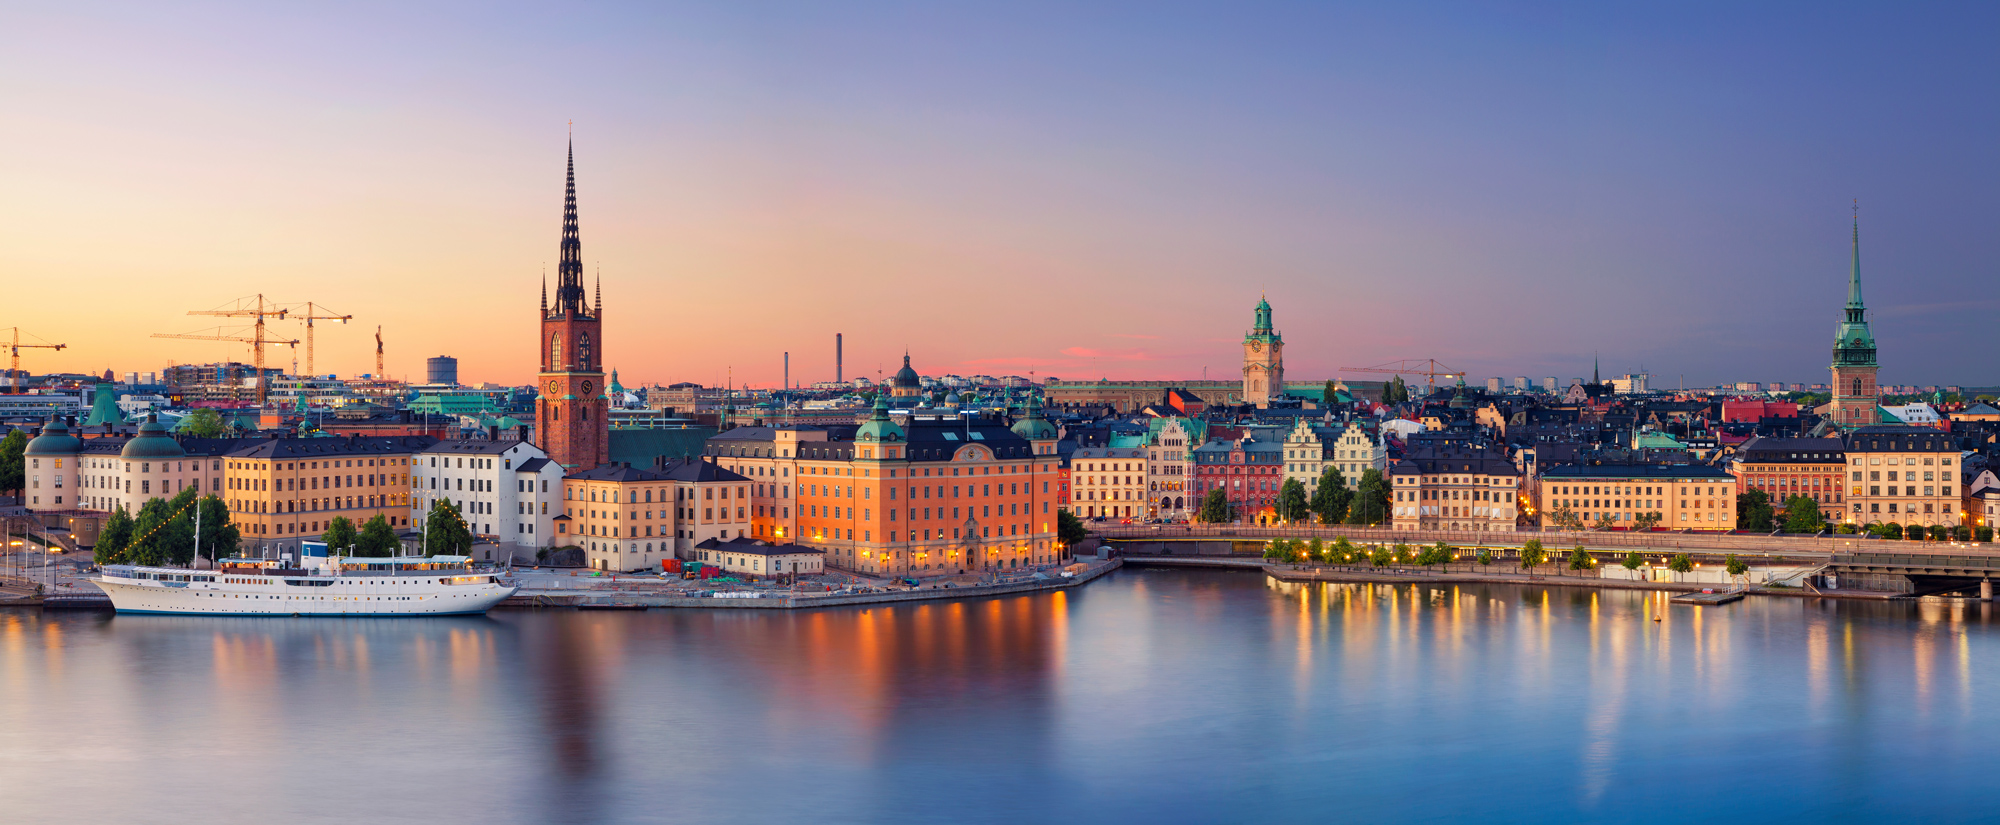 It is a picture of Stockholm, Old town, seen from the water.